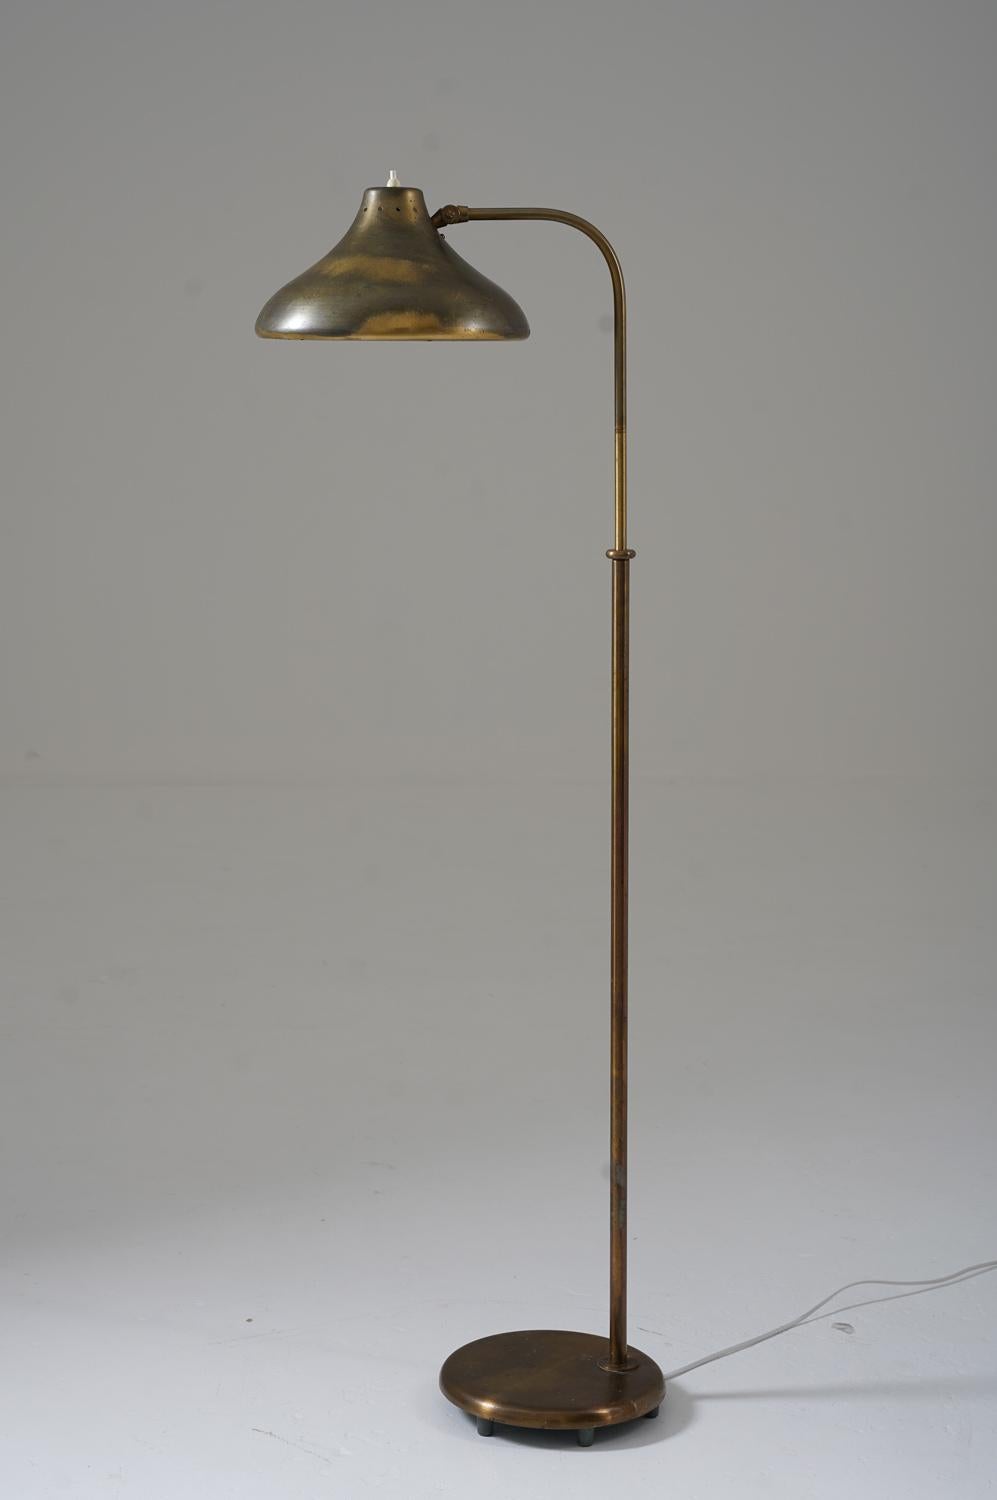 Rare Swedish Modern floor lamp model 5570 by Böhlmarks, Sweden, 1930s. 
This lamp is made of brass. The shade is fixtured on a swivel arm, which is adjustable in height (125-143cm, 49-56